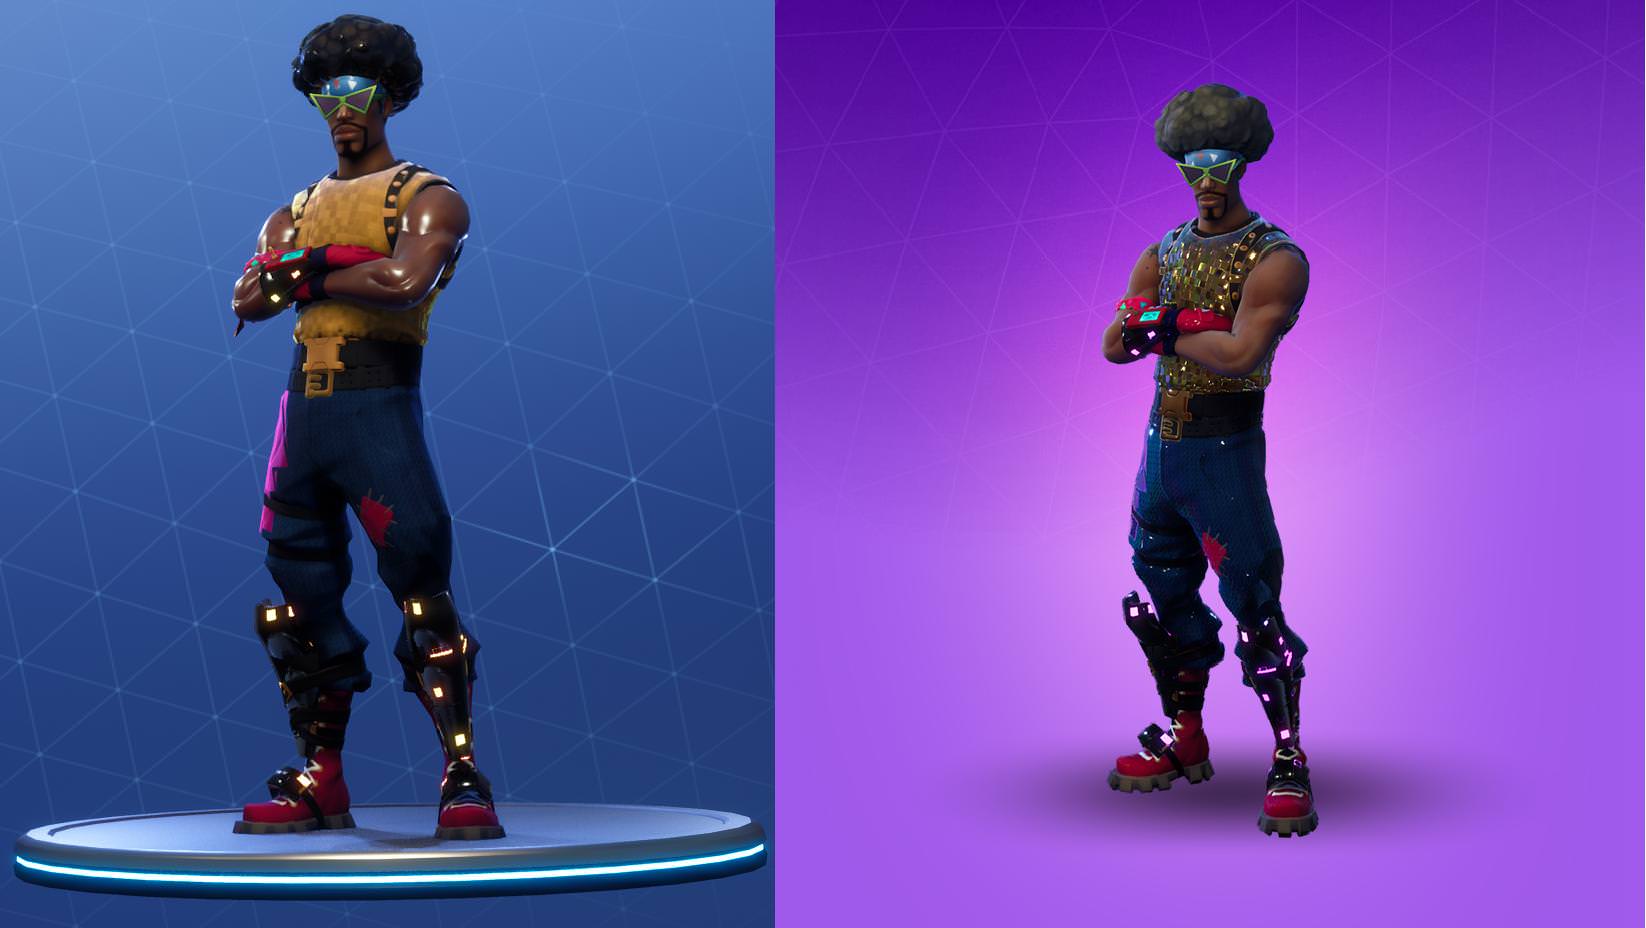 Funk Ops Skin Changed New Left Vs Old Right Seems